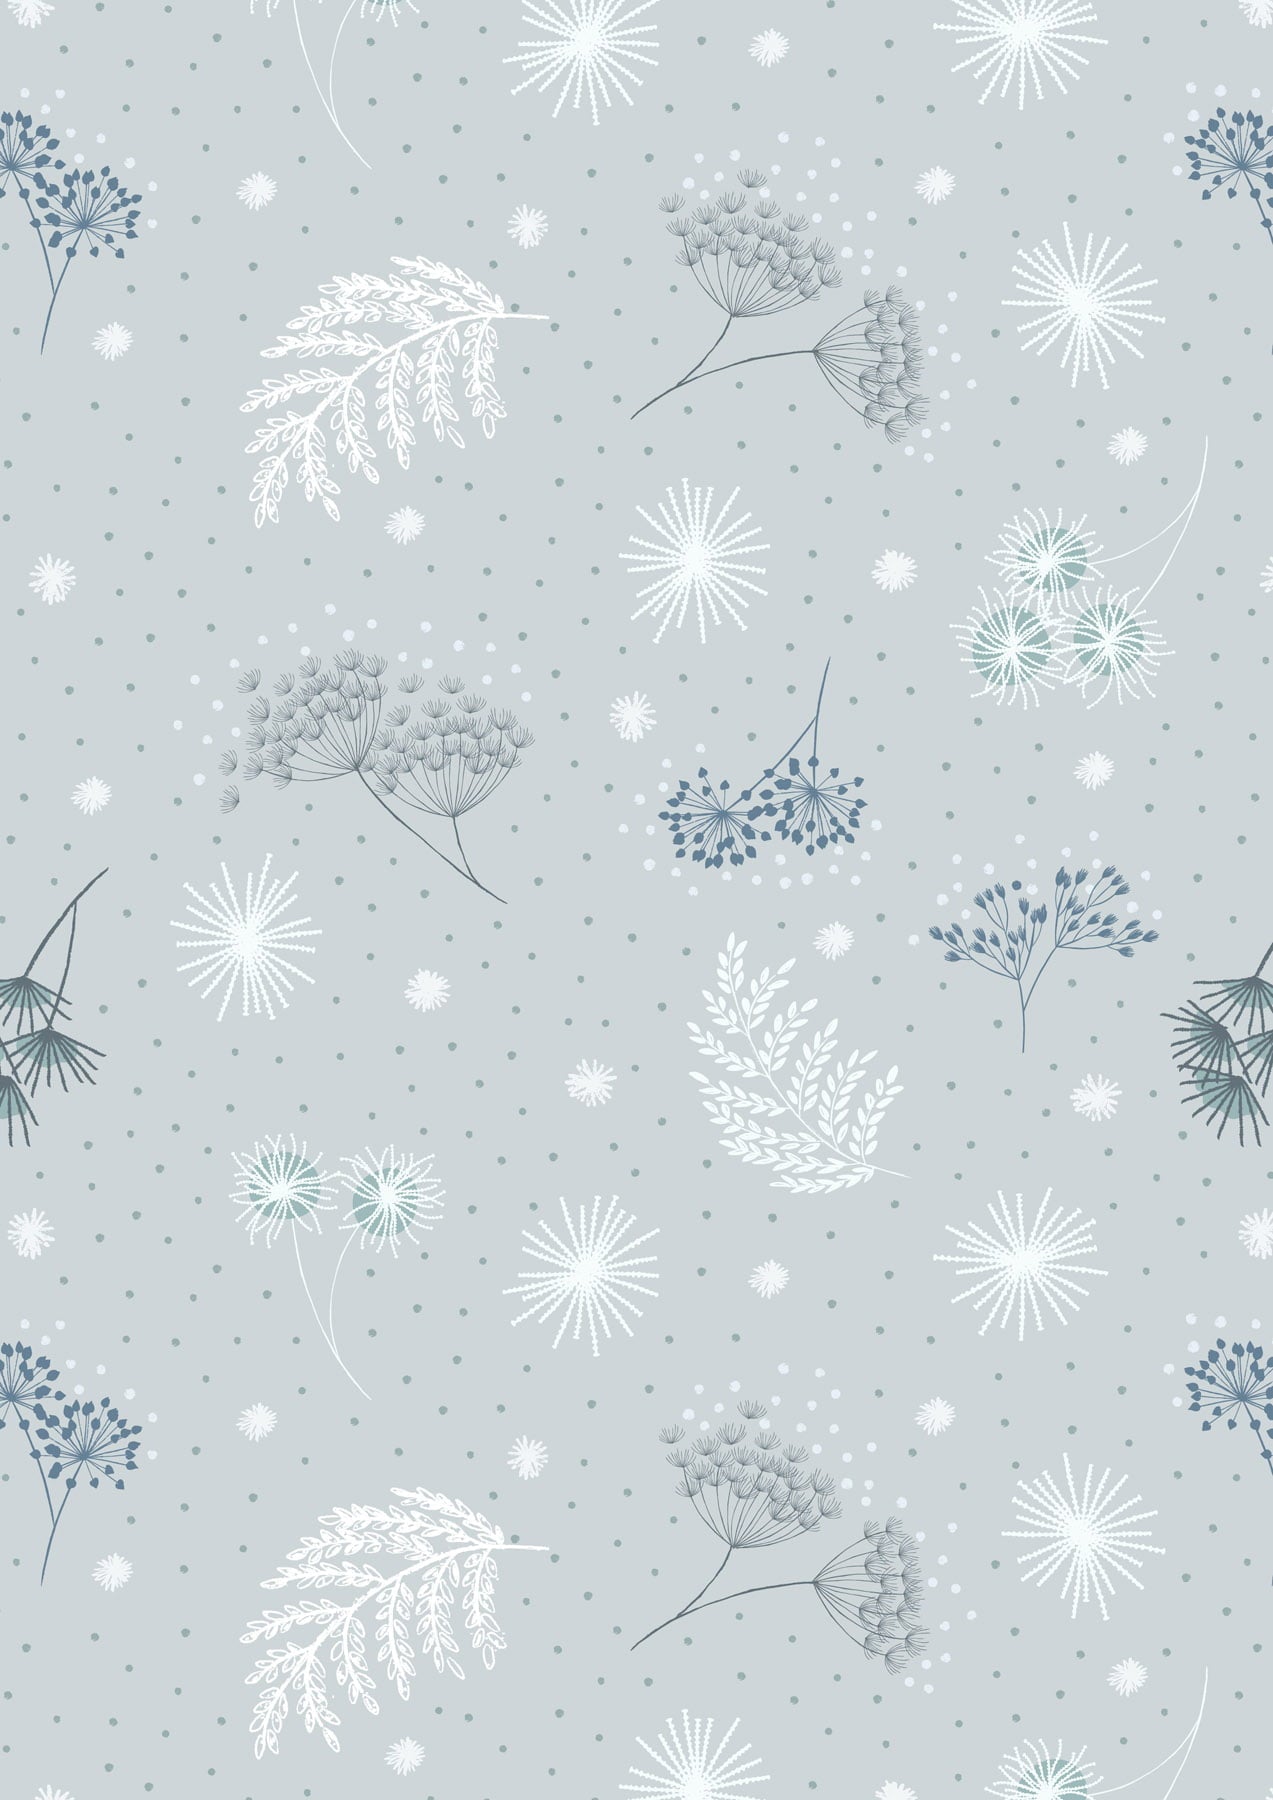 The Secret Garden - Frosted Garden on Light Grey With Pearl Elements